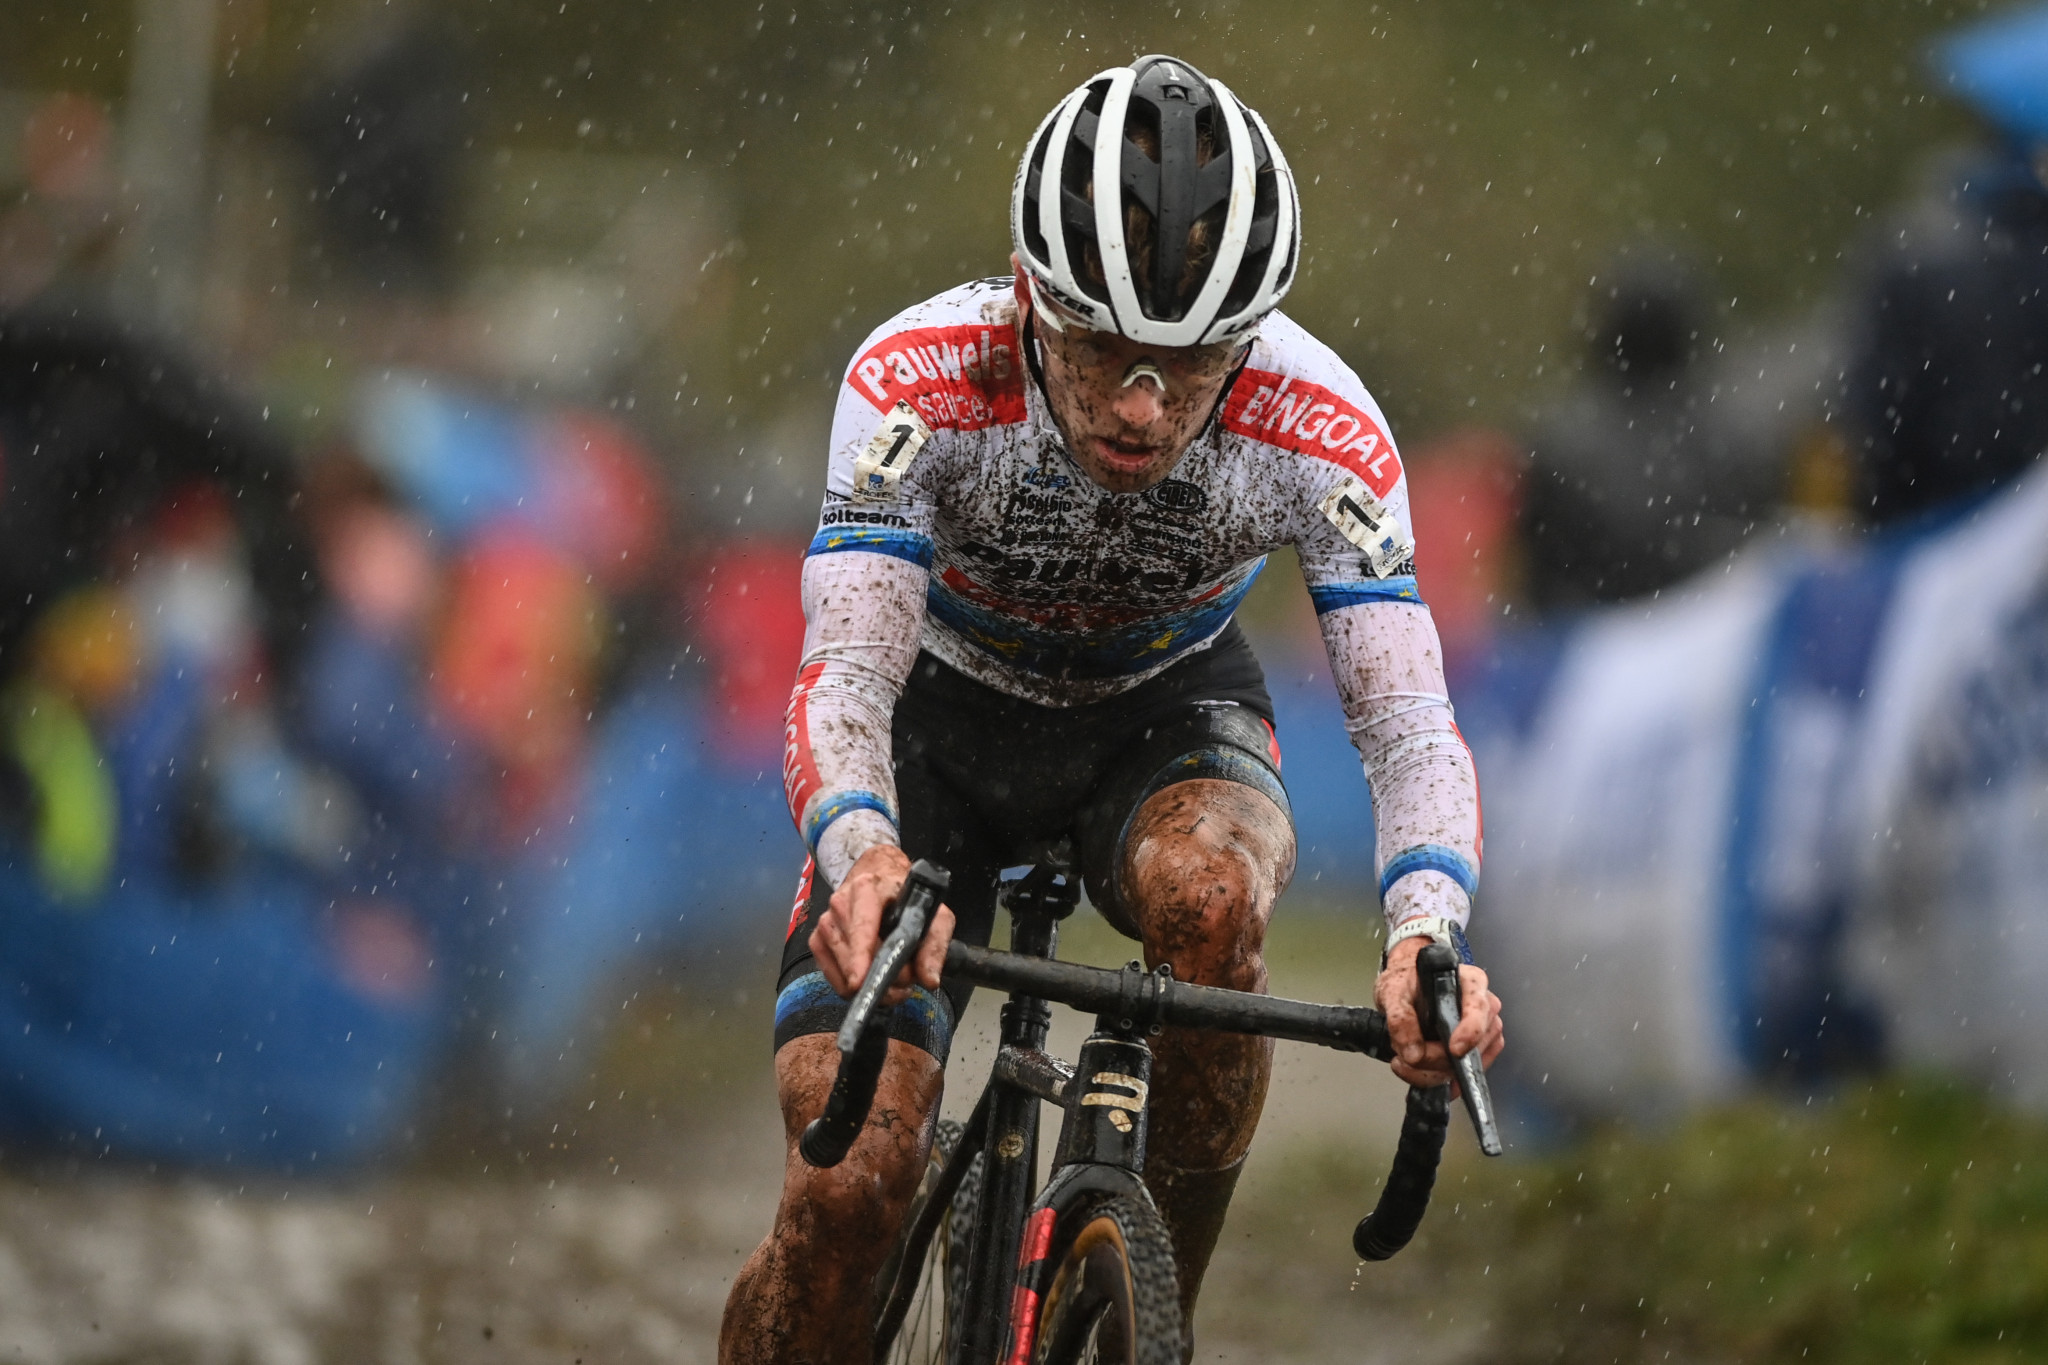 Leaders Brand and Iserbyt back in UCI Cyclo-cross World Cup action in Koksijde